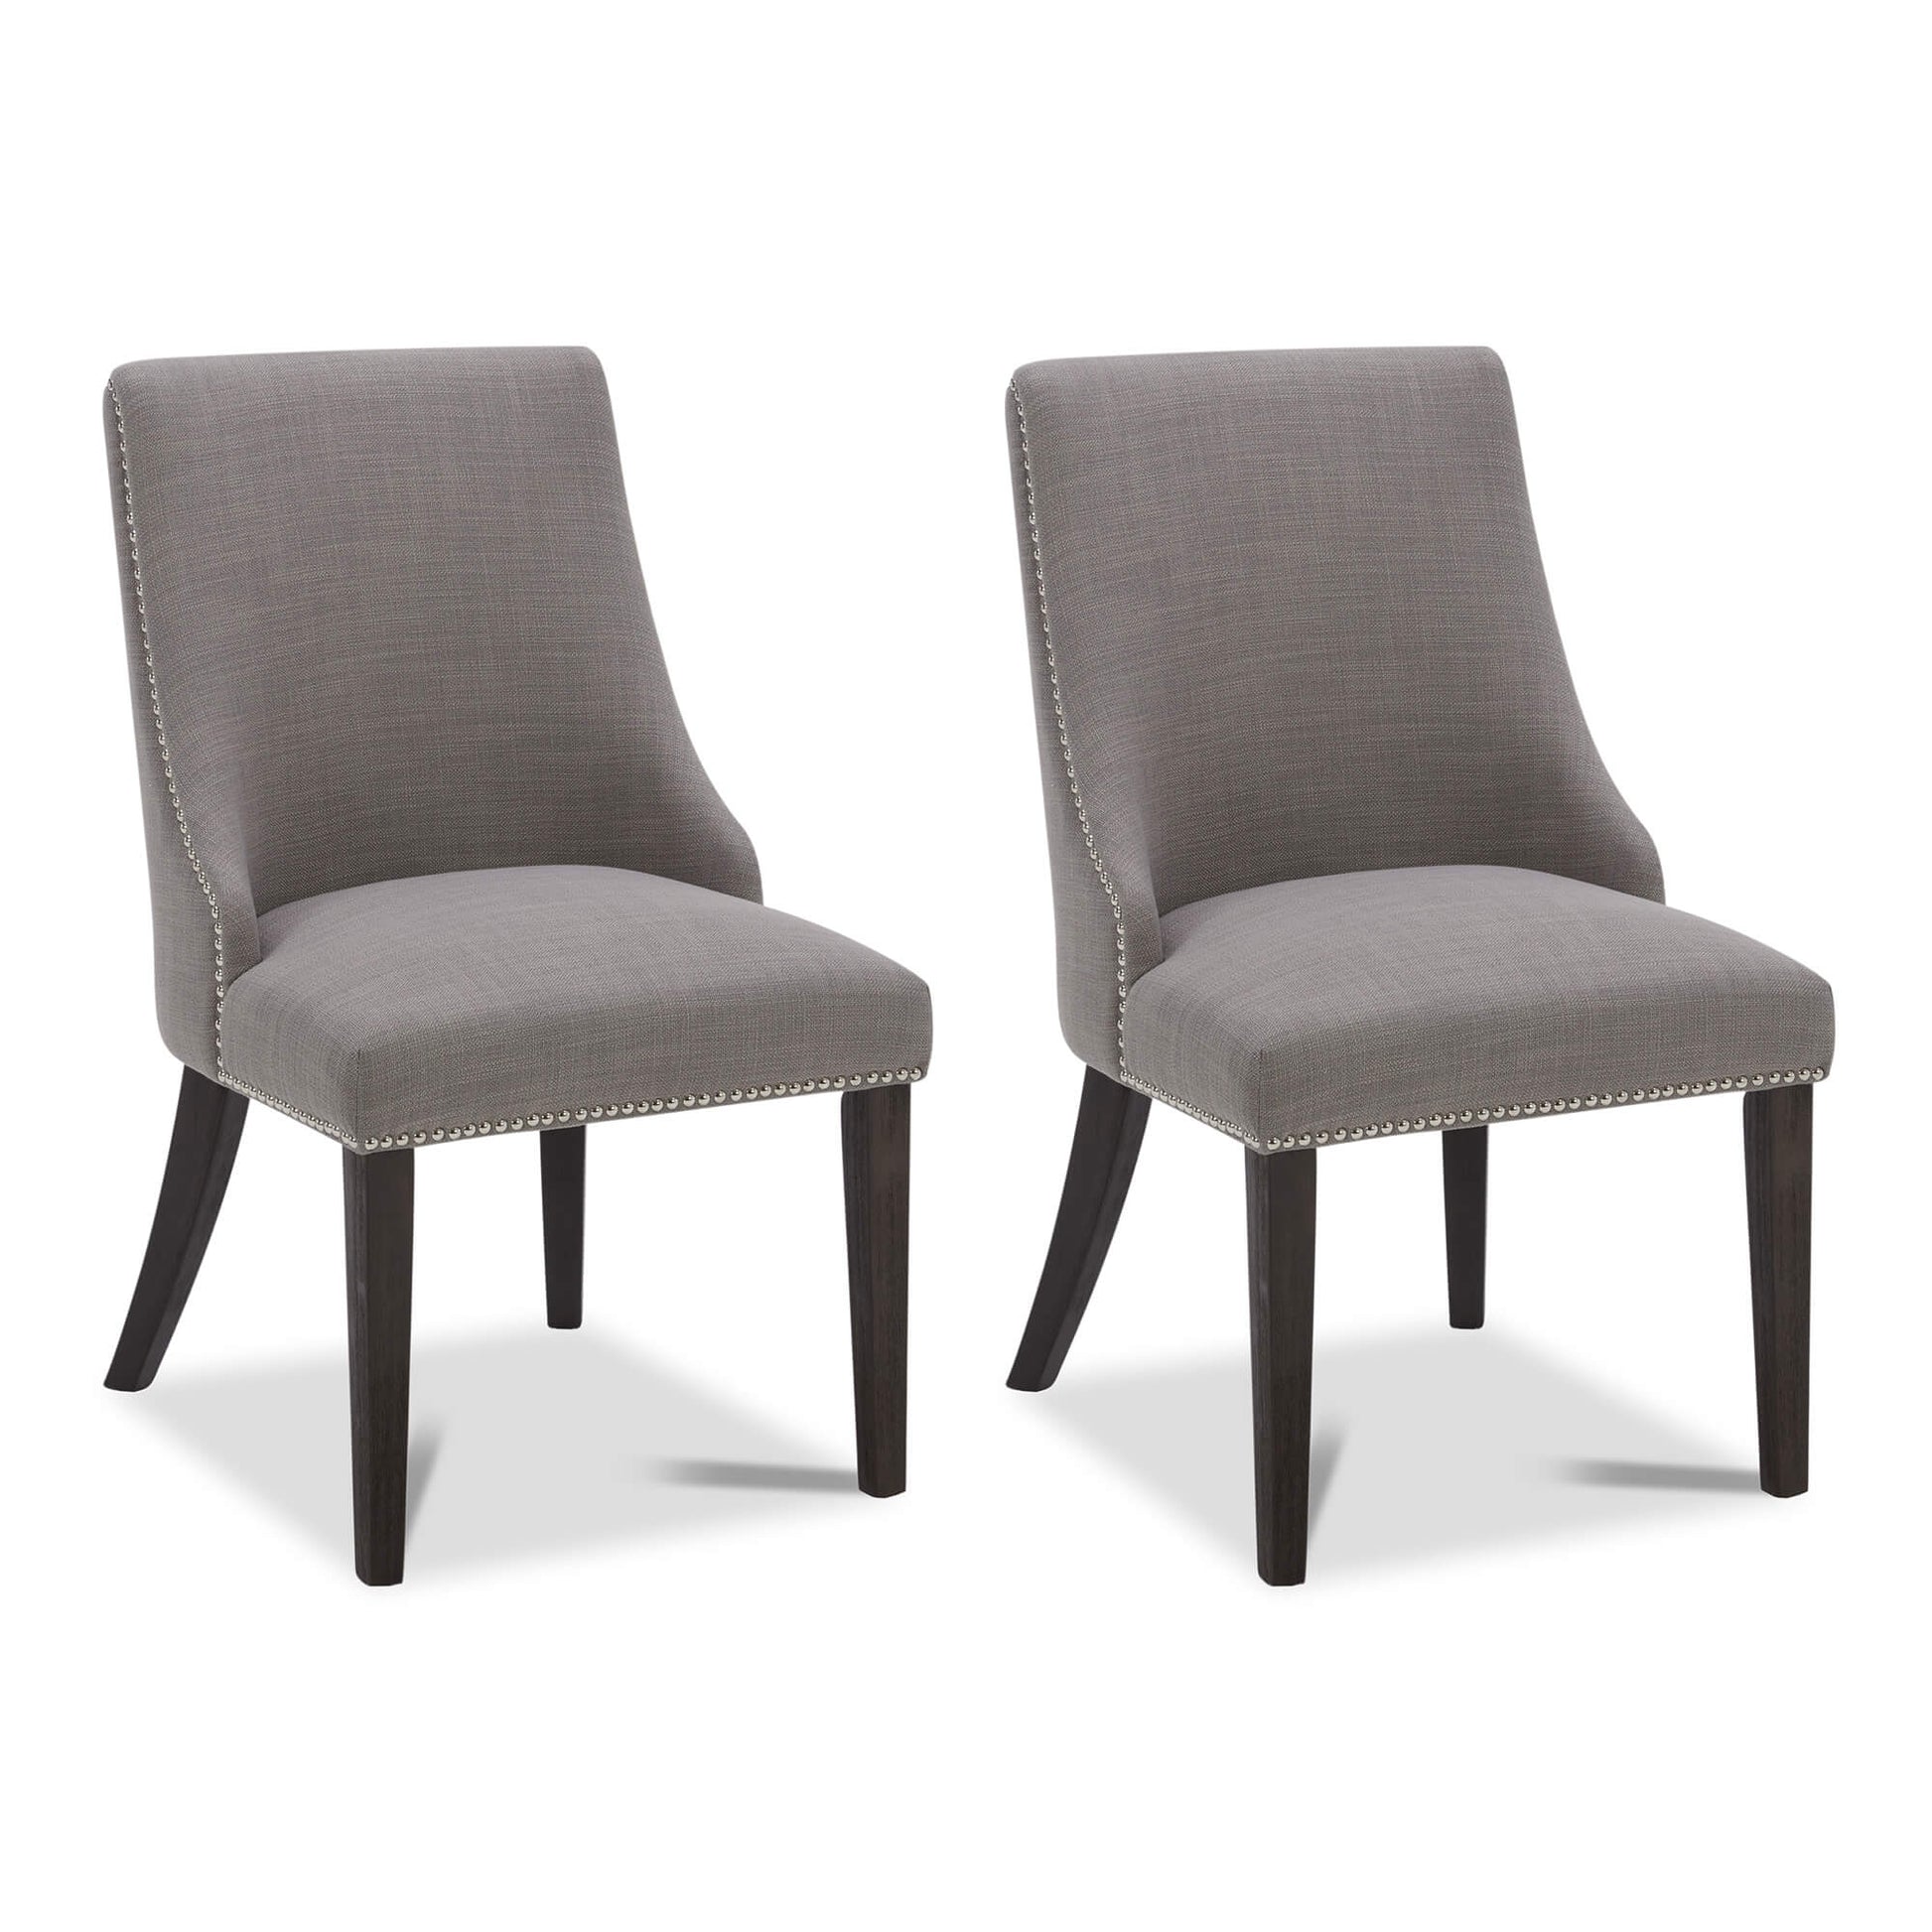 CHITA LIVING-Asher Upholstered Dining Chair with Nailhead Trim (Set of 2)-Dining Chairs-Fabric-Flint Gray (Performance Fabric)-